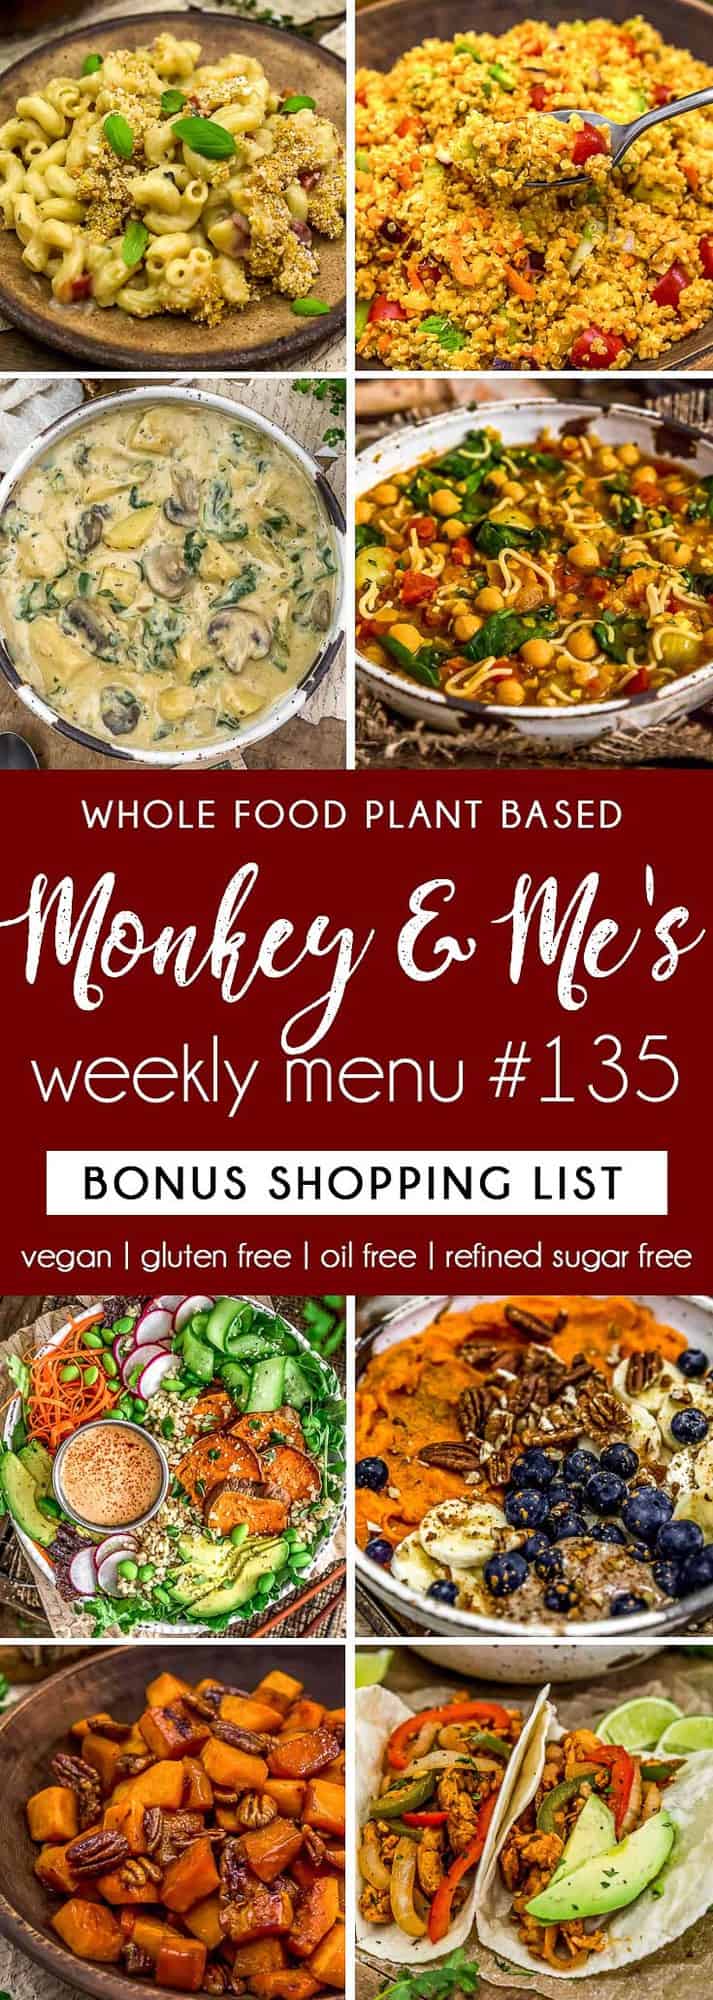 Monkey and Me's Menu 135 featuring 8 recipes